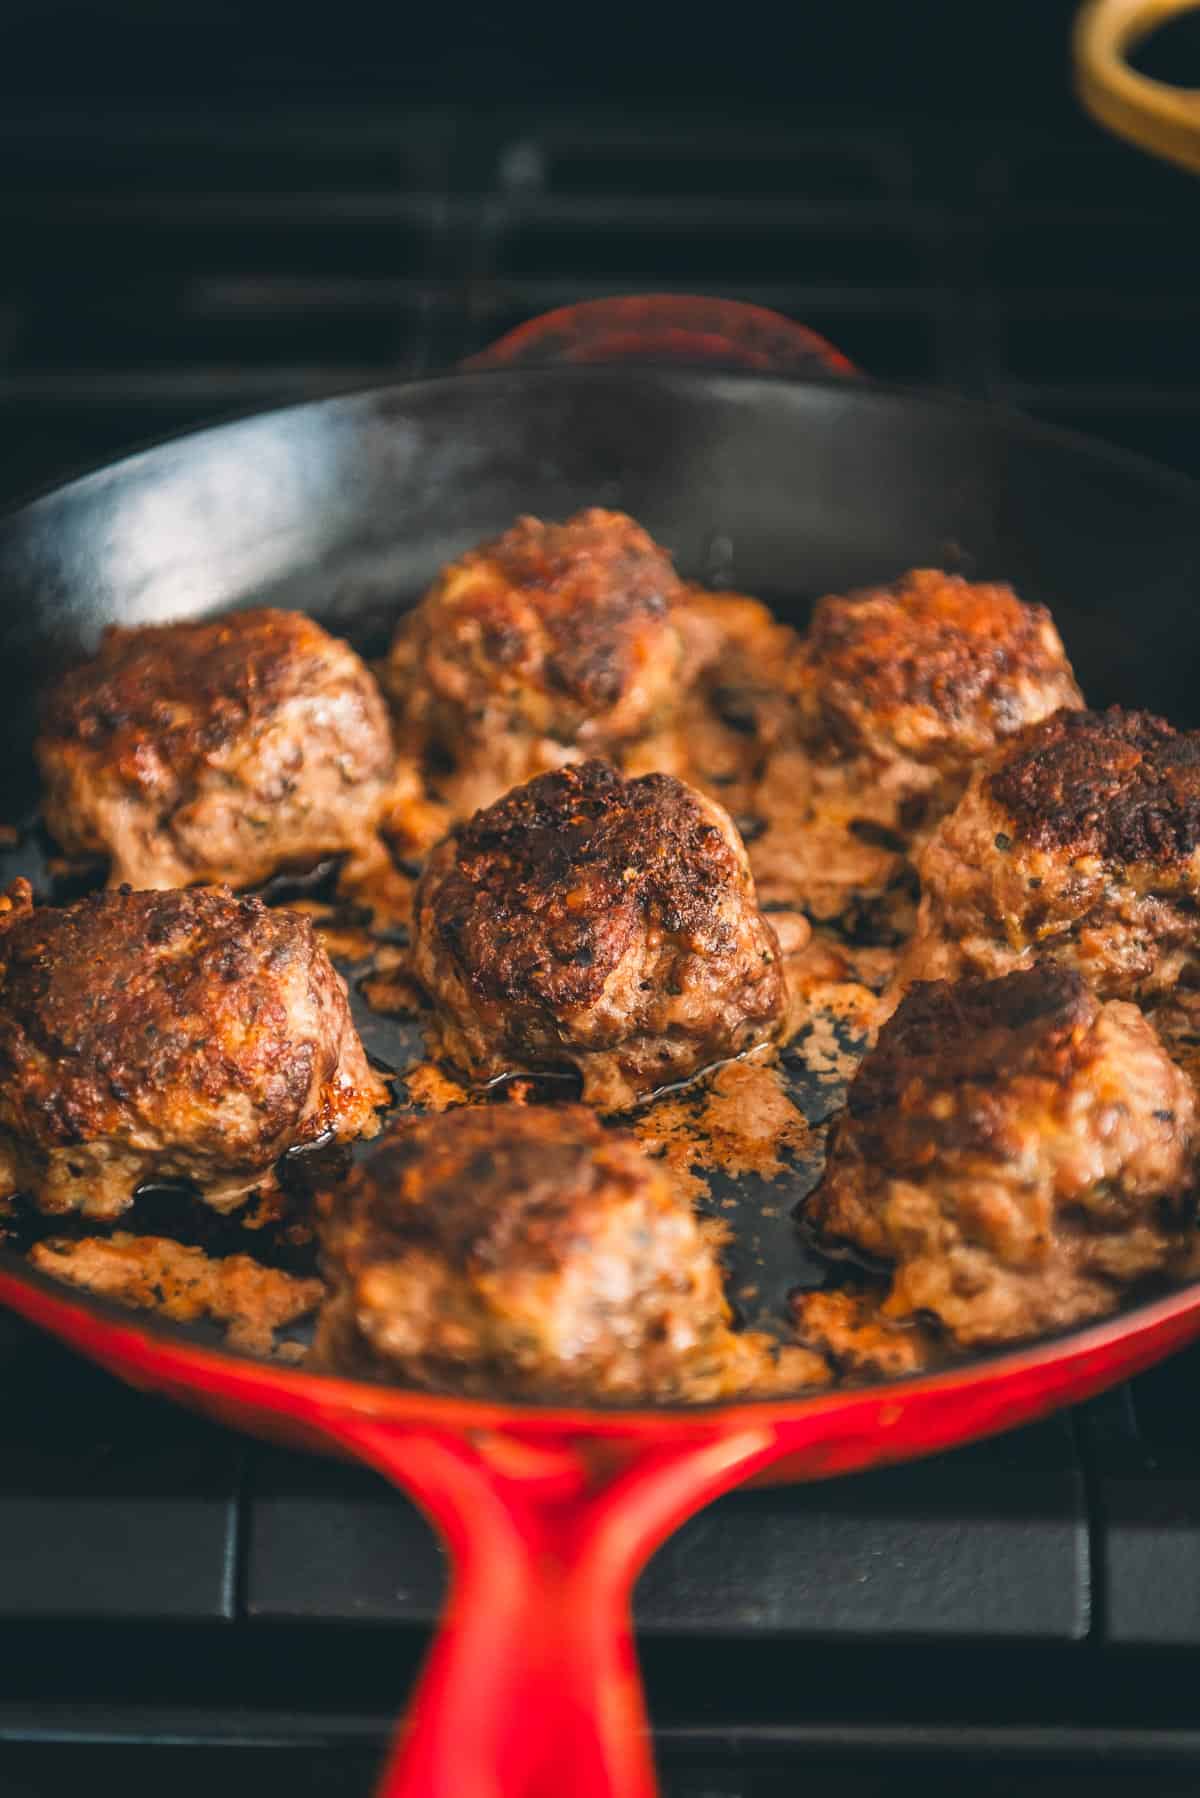 Meatballs in a skillet on the stove.